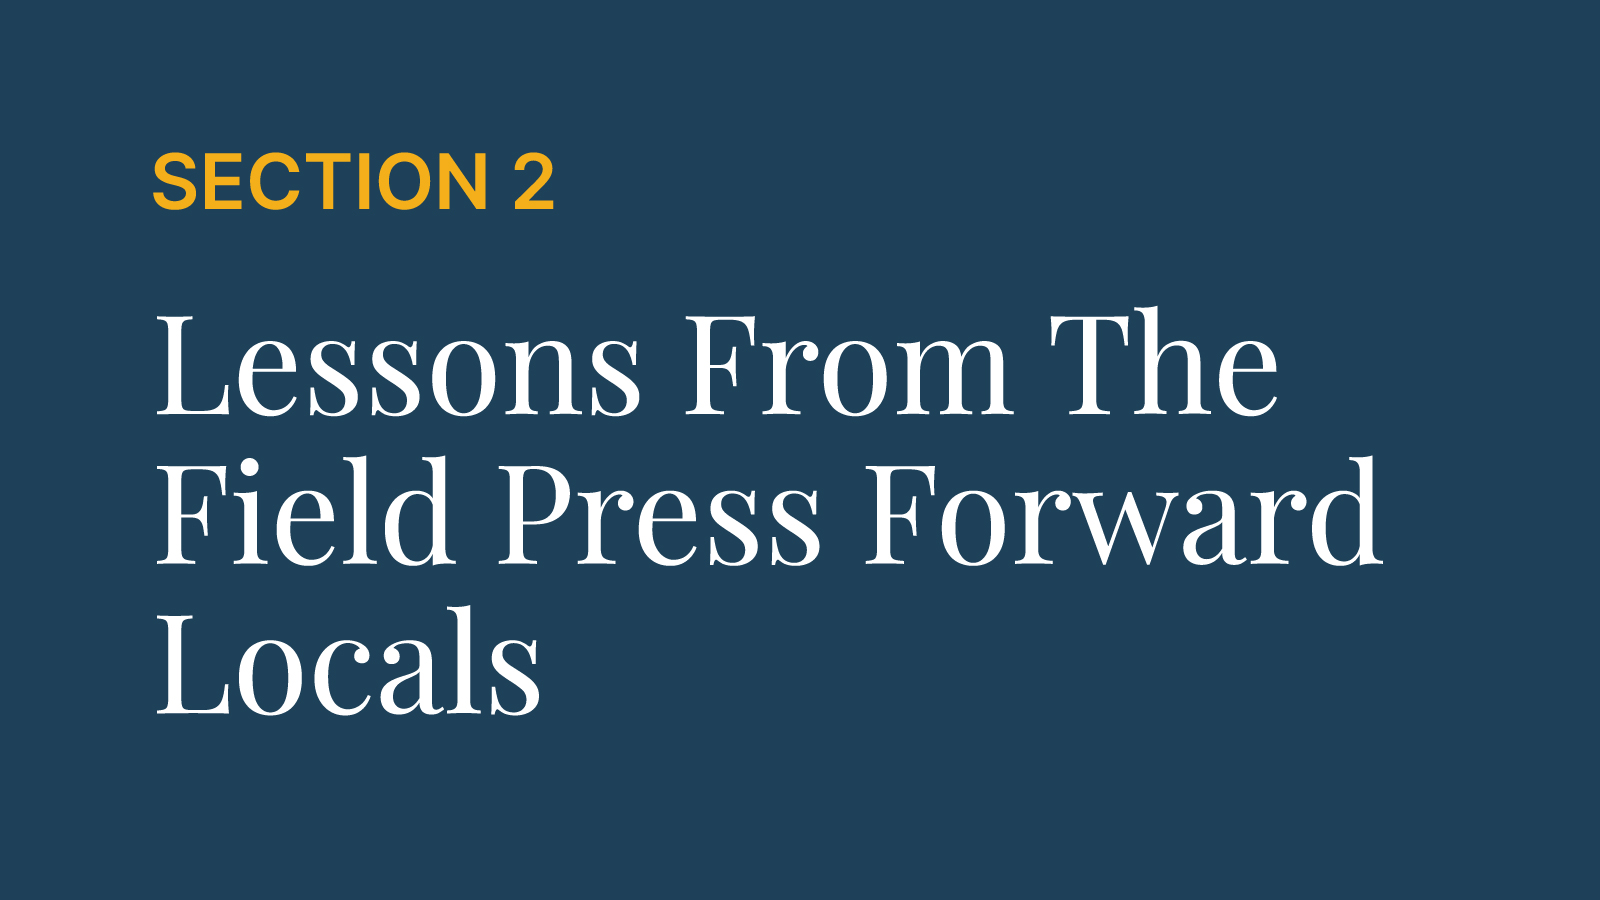 Section 2 | Lessons from the Press Forward Locals